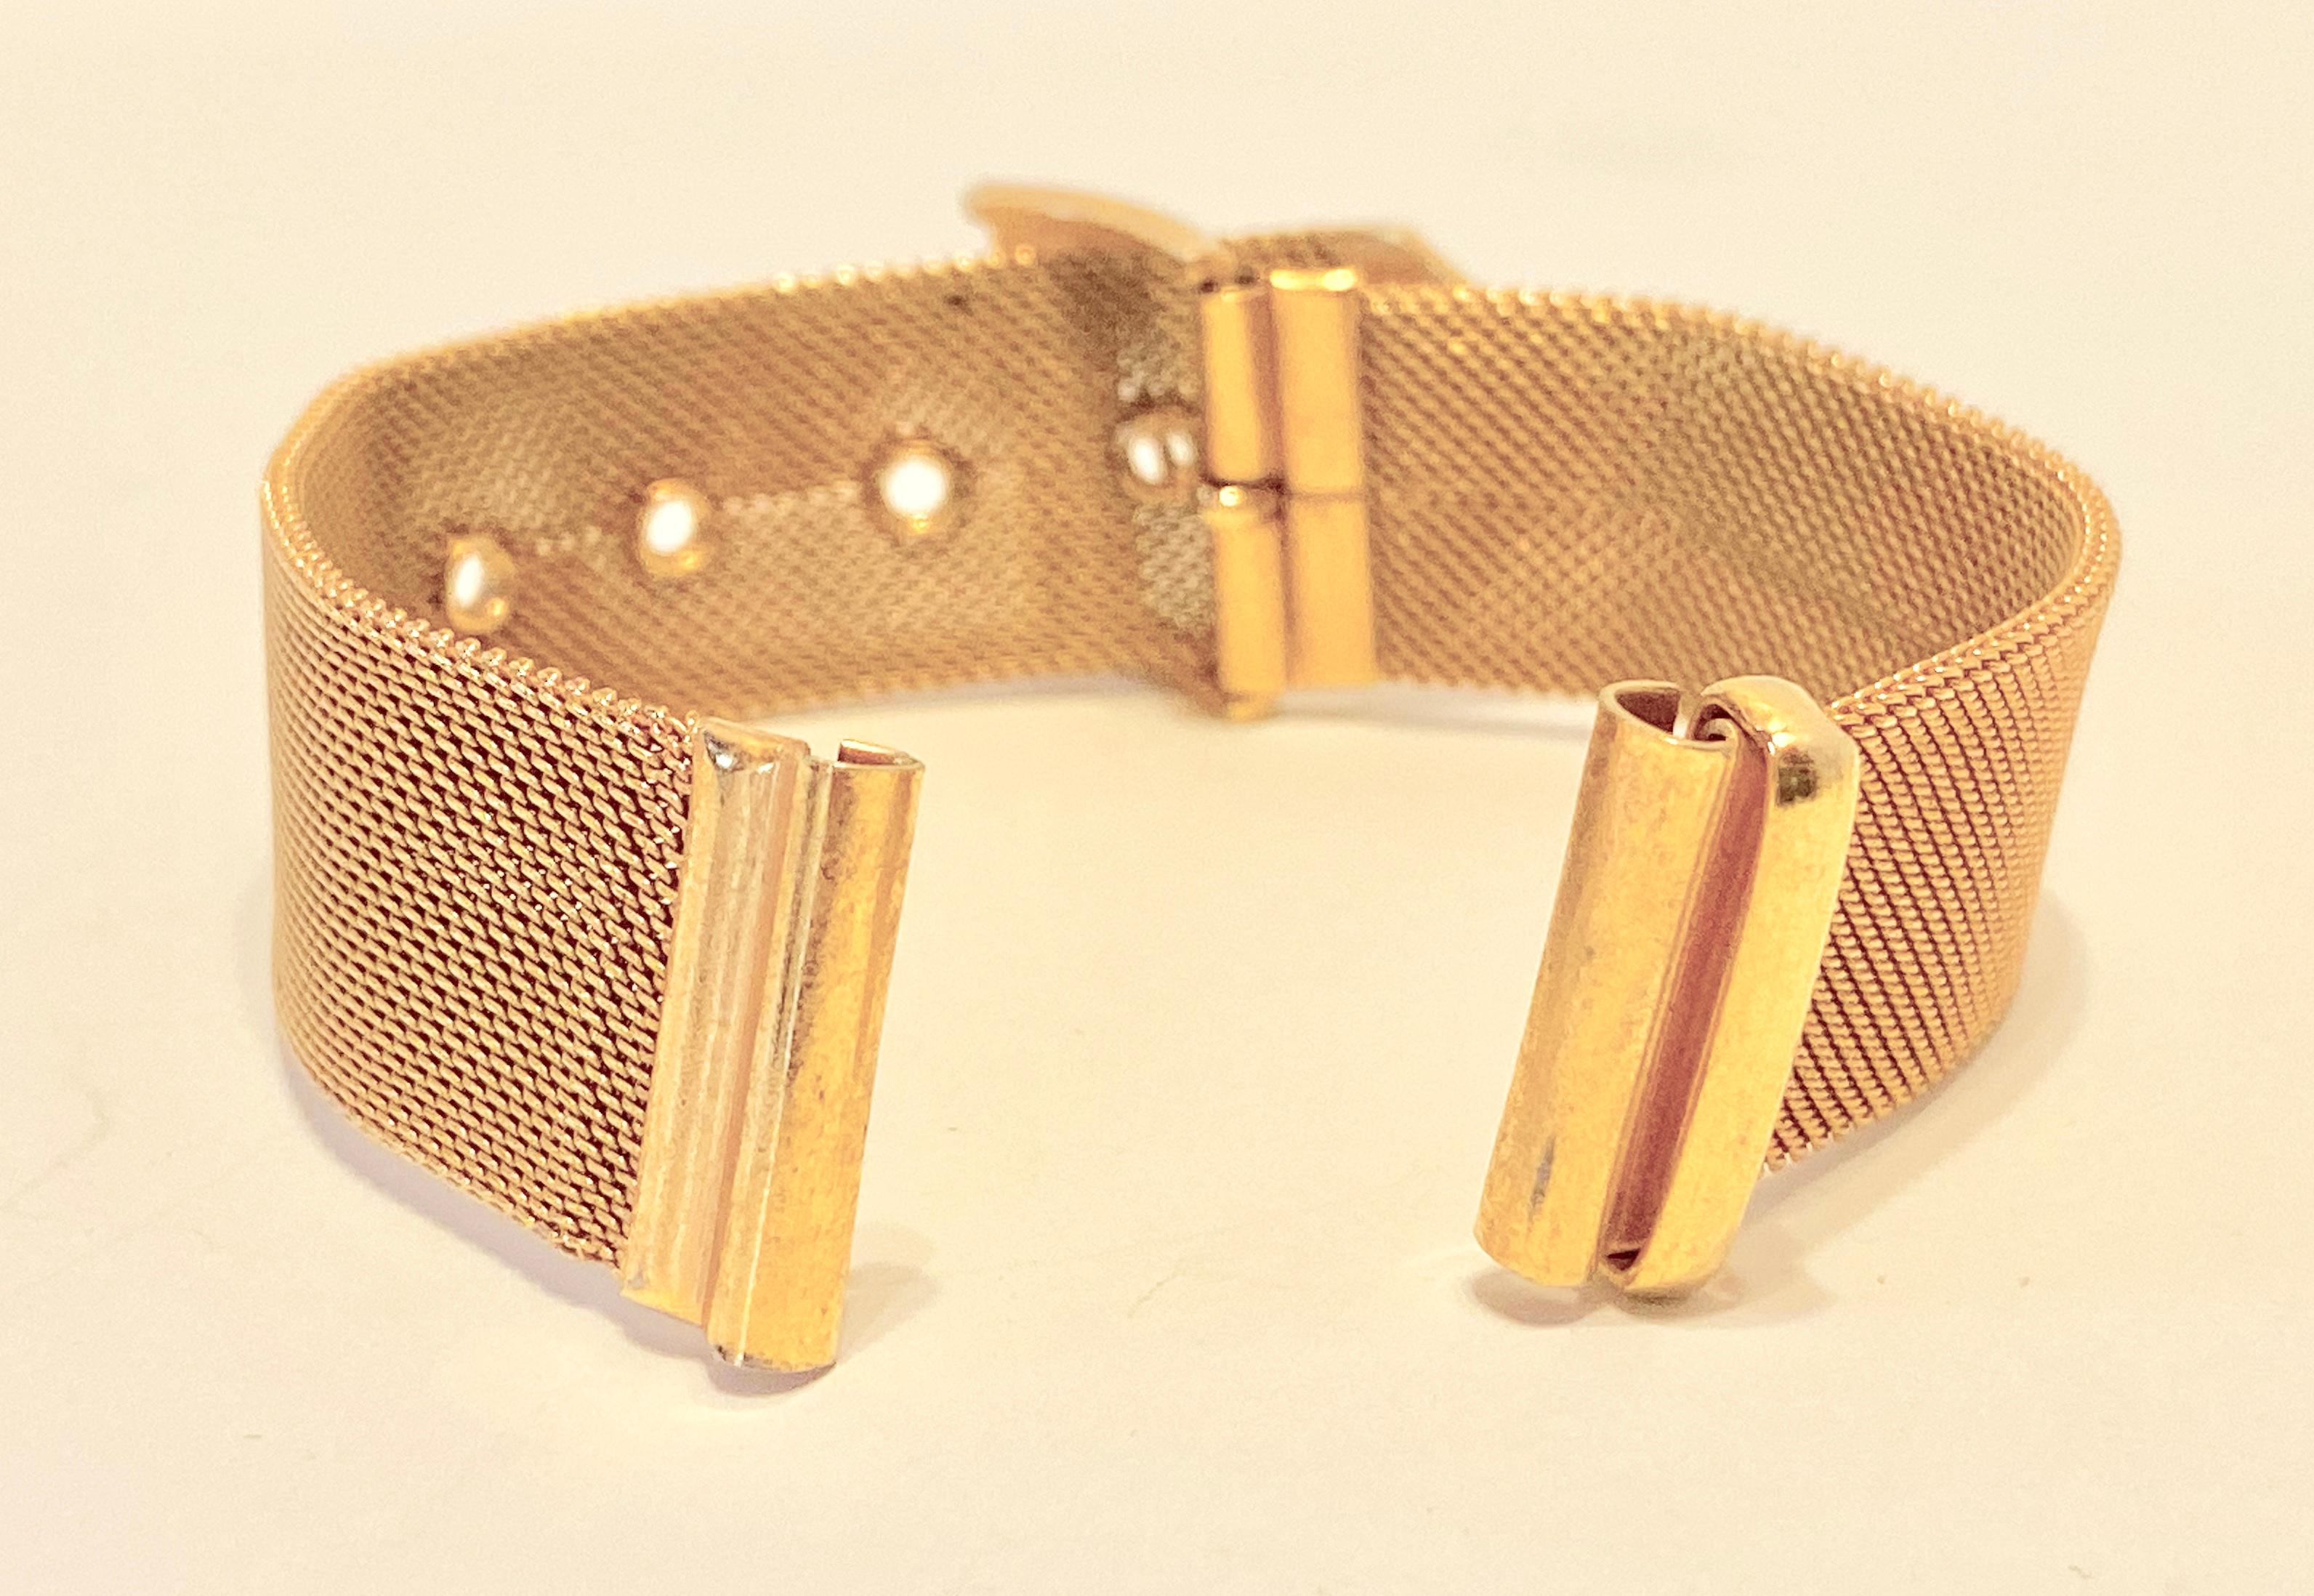        This wonderfully detailed micro gold hardware 'buckle' style adjustable 'watch' strap measures 4 1/2 inches to 6 inches in total length. The width at both ends measures 5/8 inch. Made in United States.